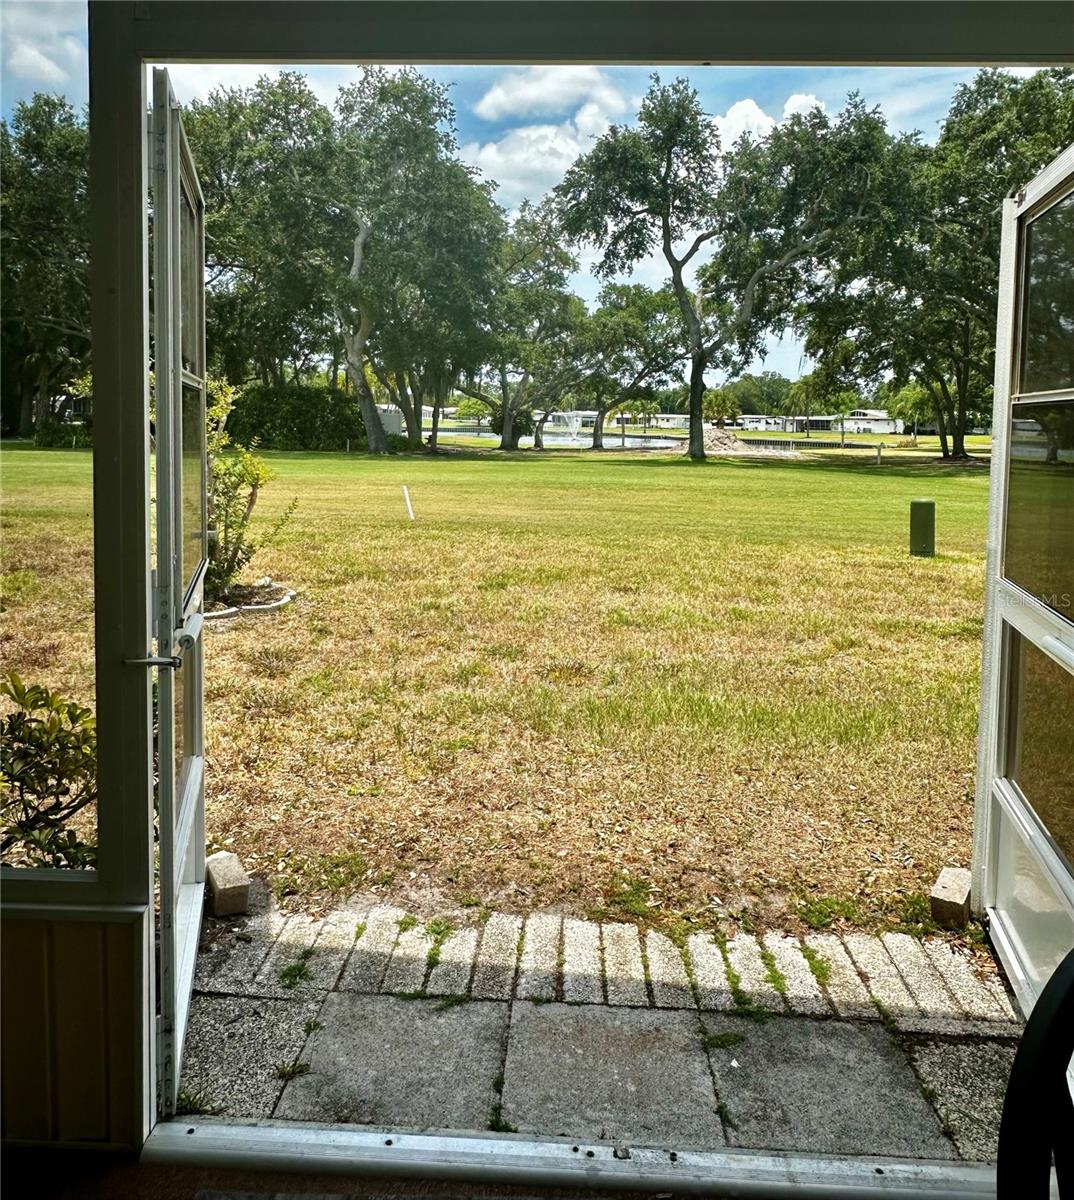 Double doors fully open to for golf cart storage and to enjoy the great outdoors.